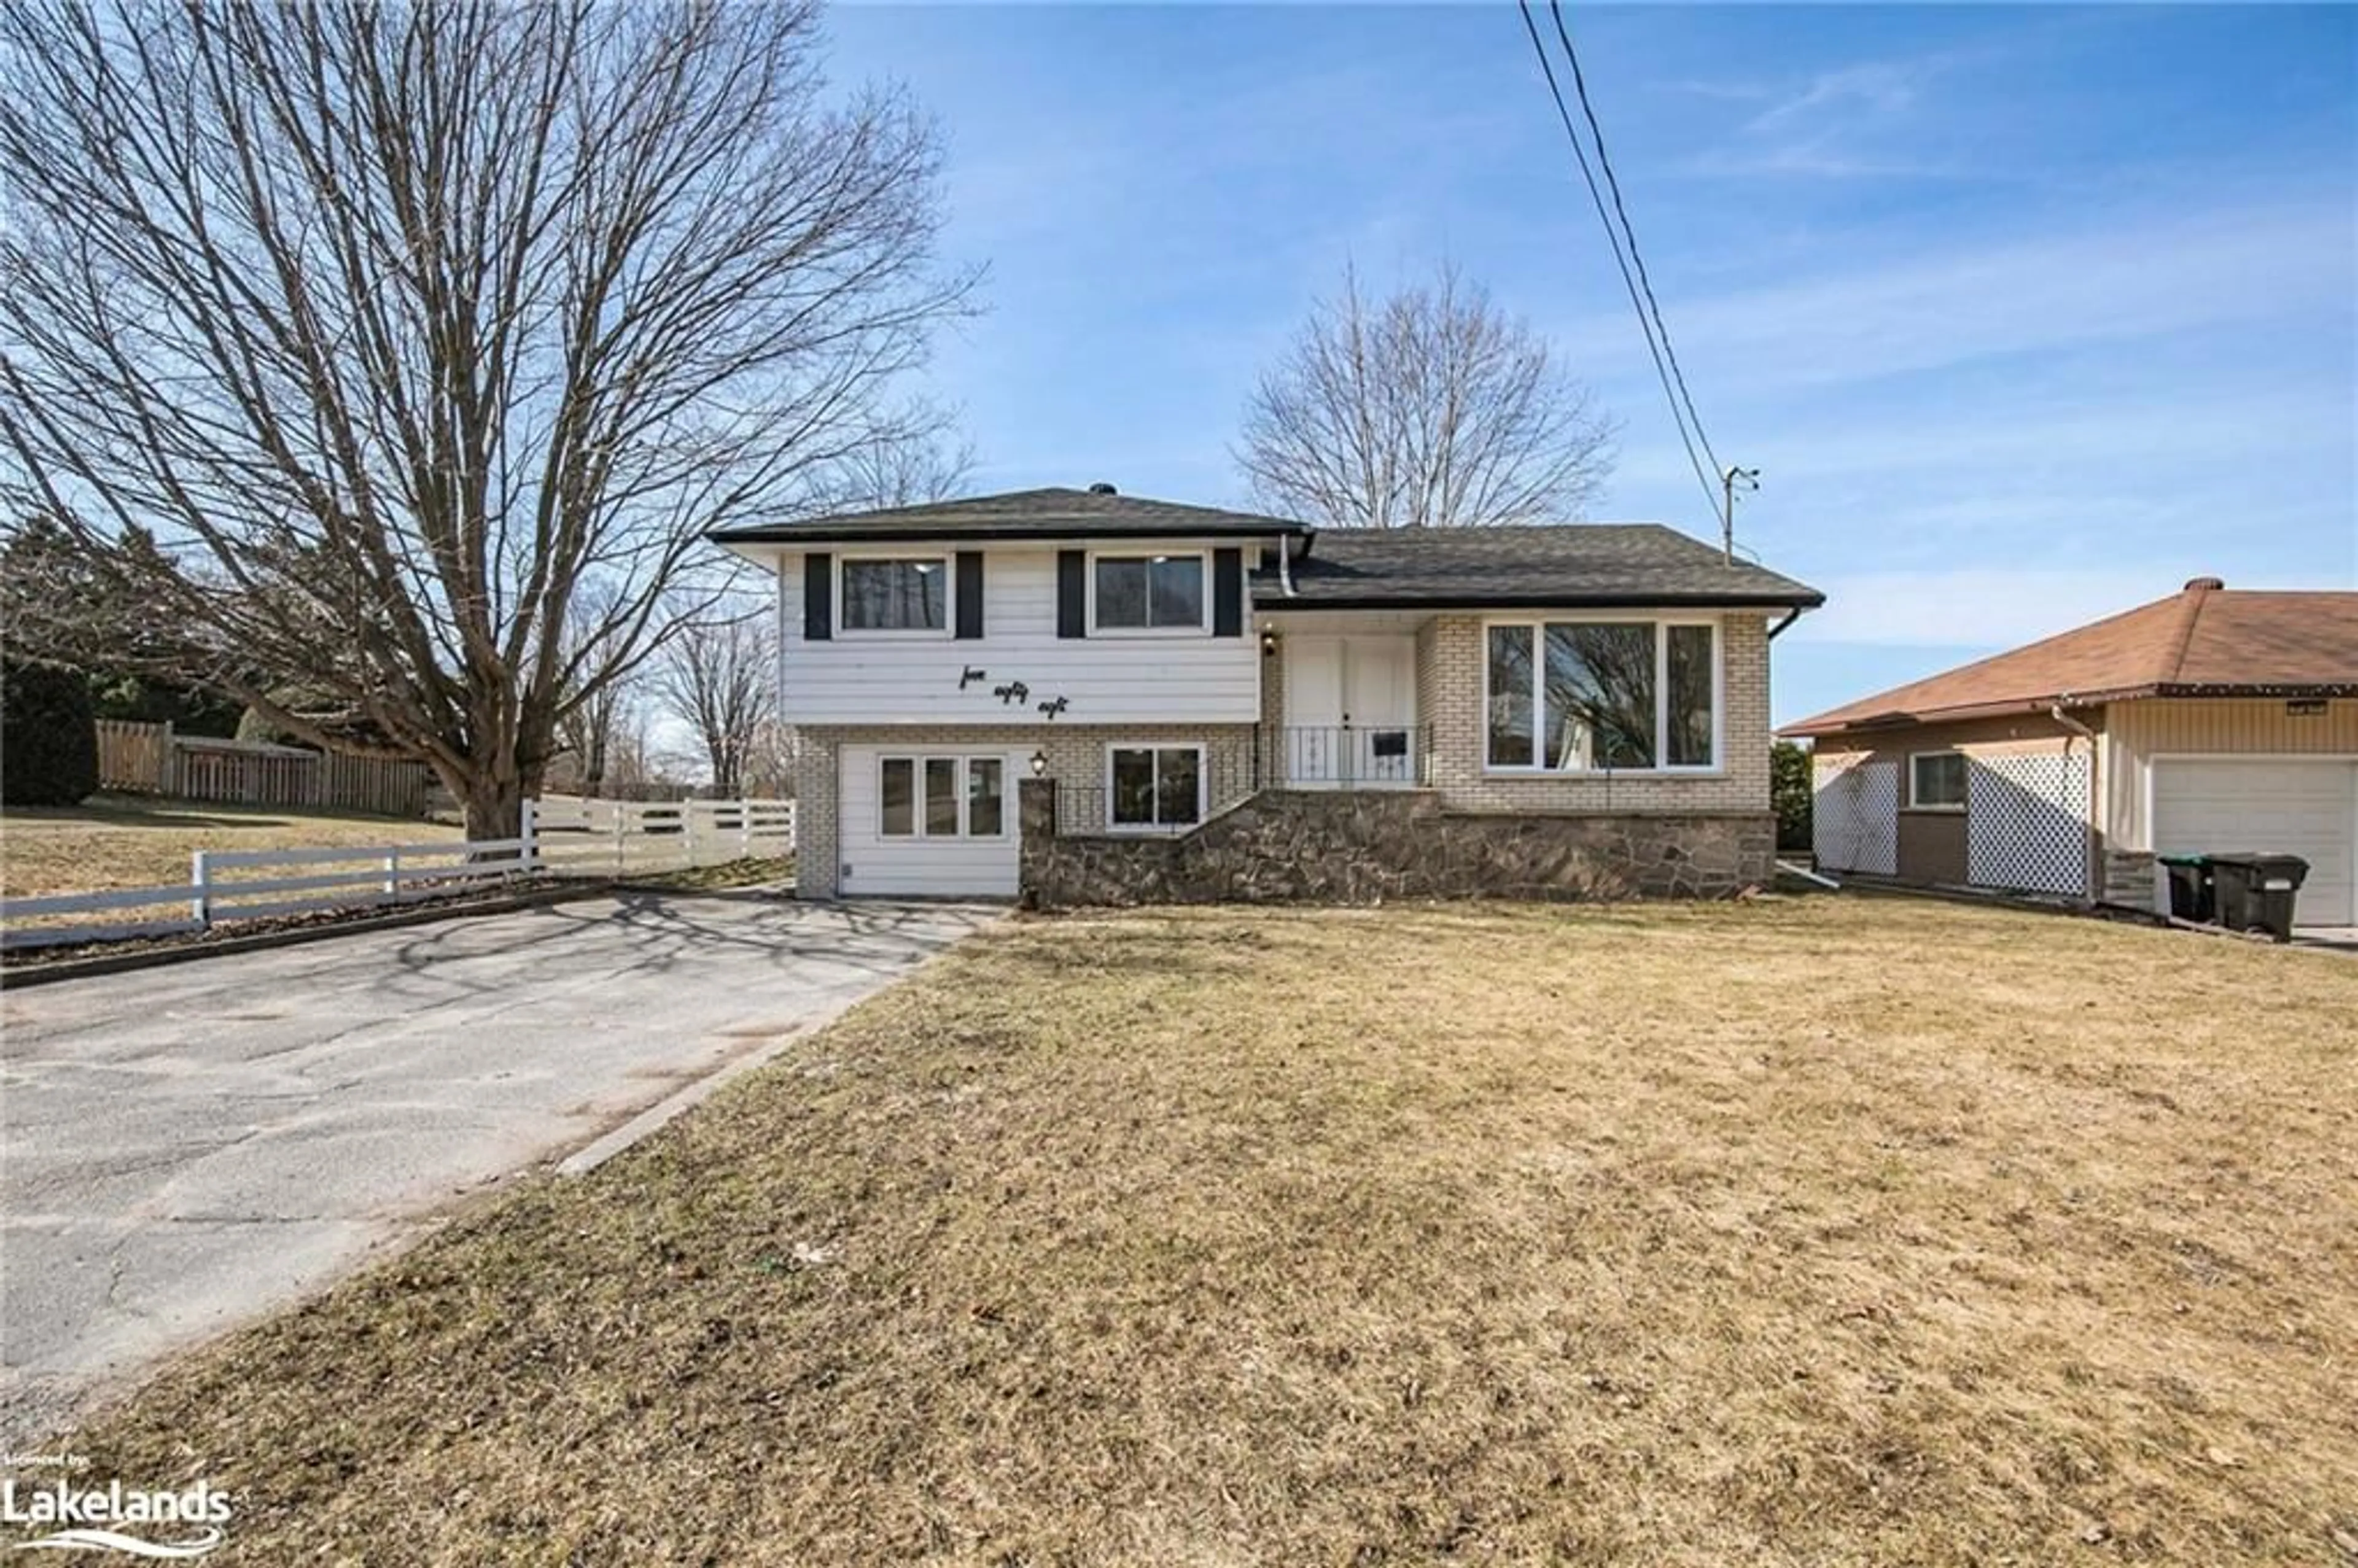 Frontside or backside of a home for 588 Manly St, Midland Ontario L4R 3G3